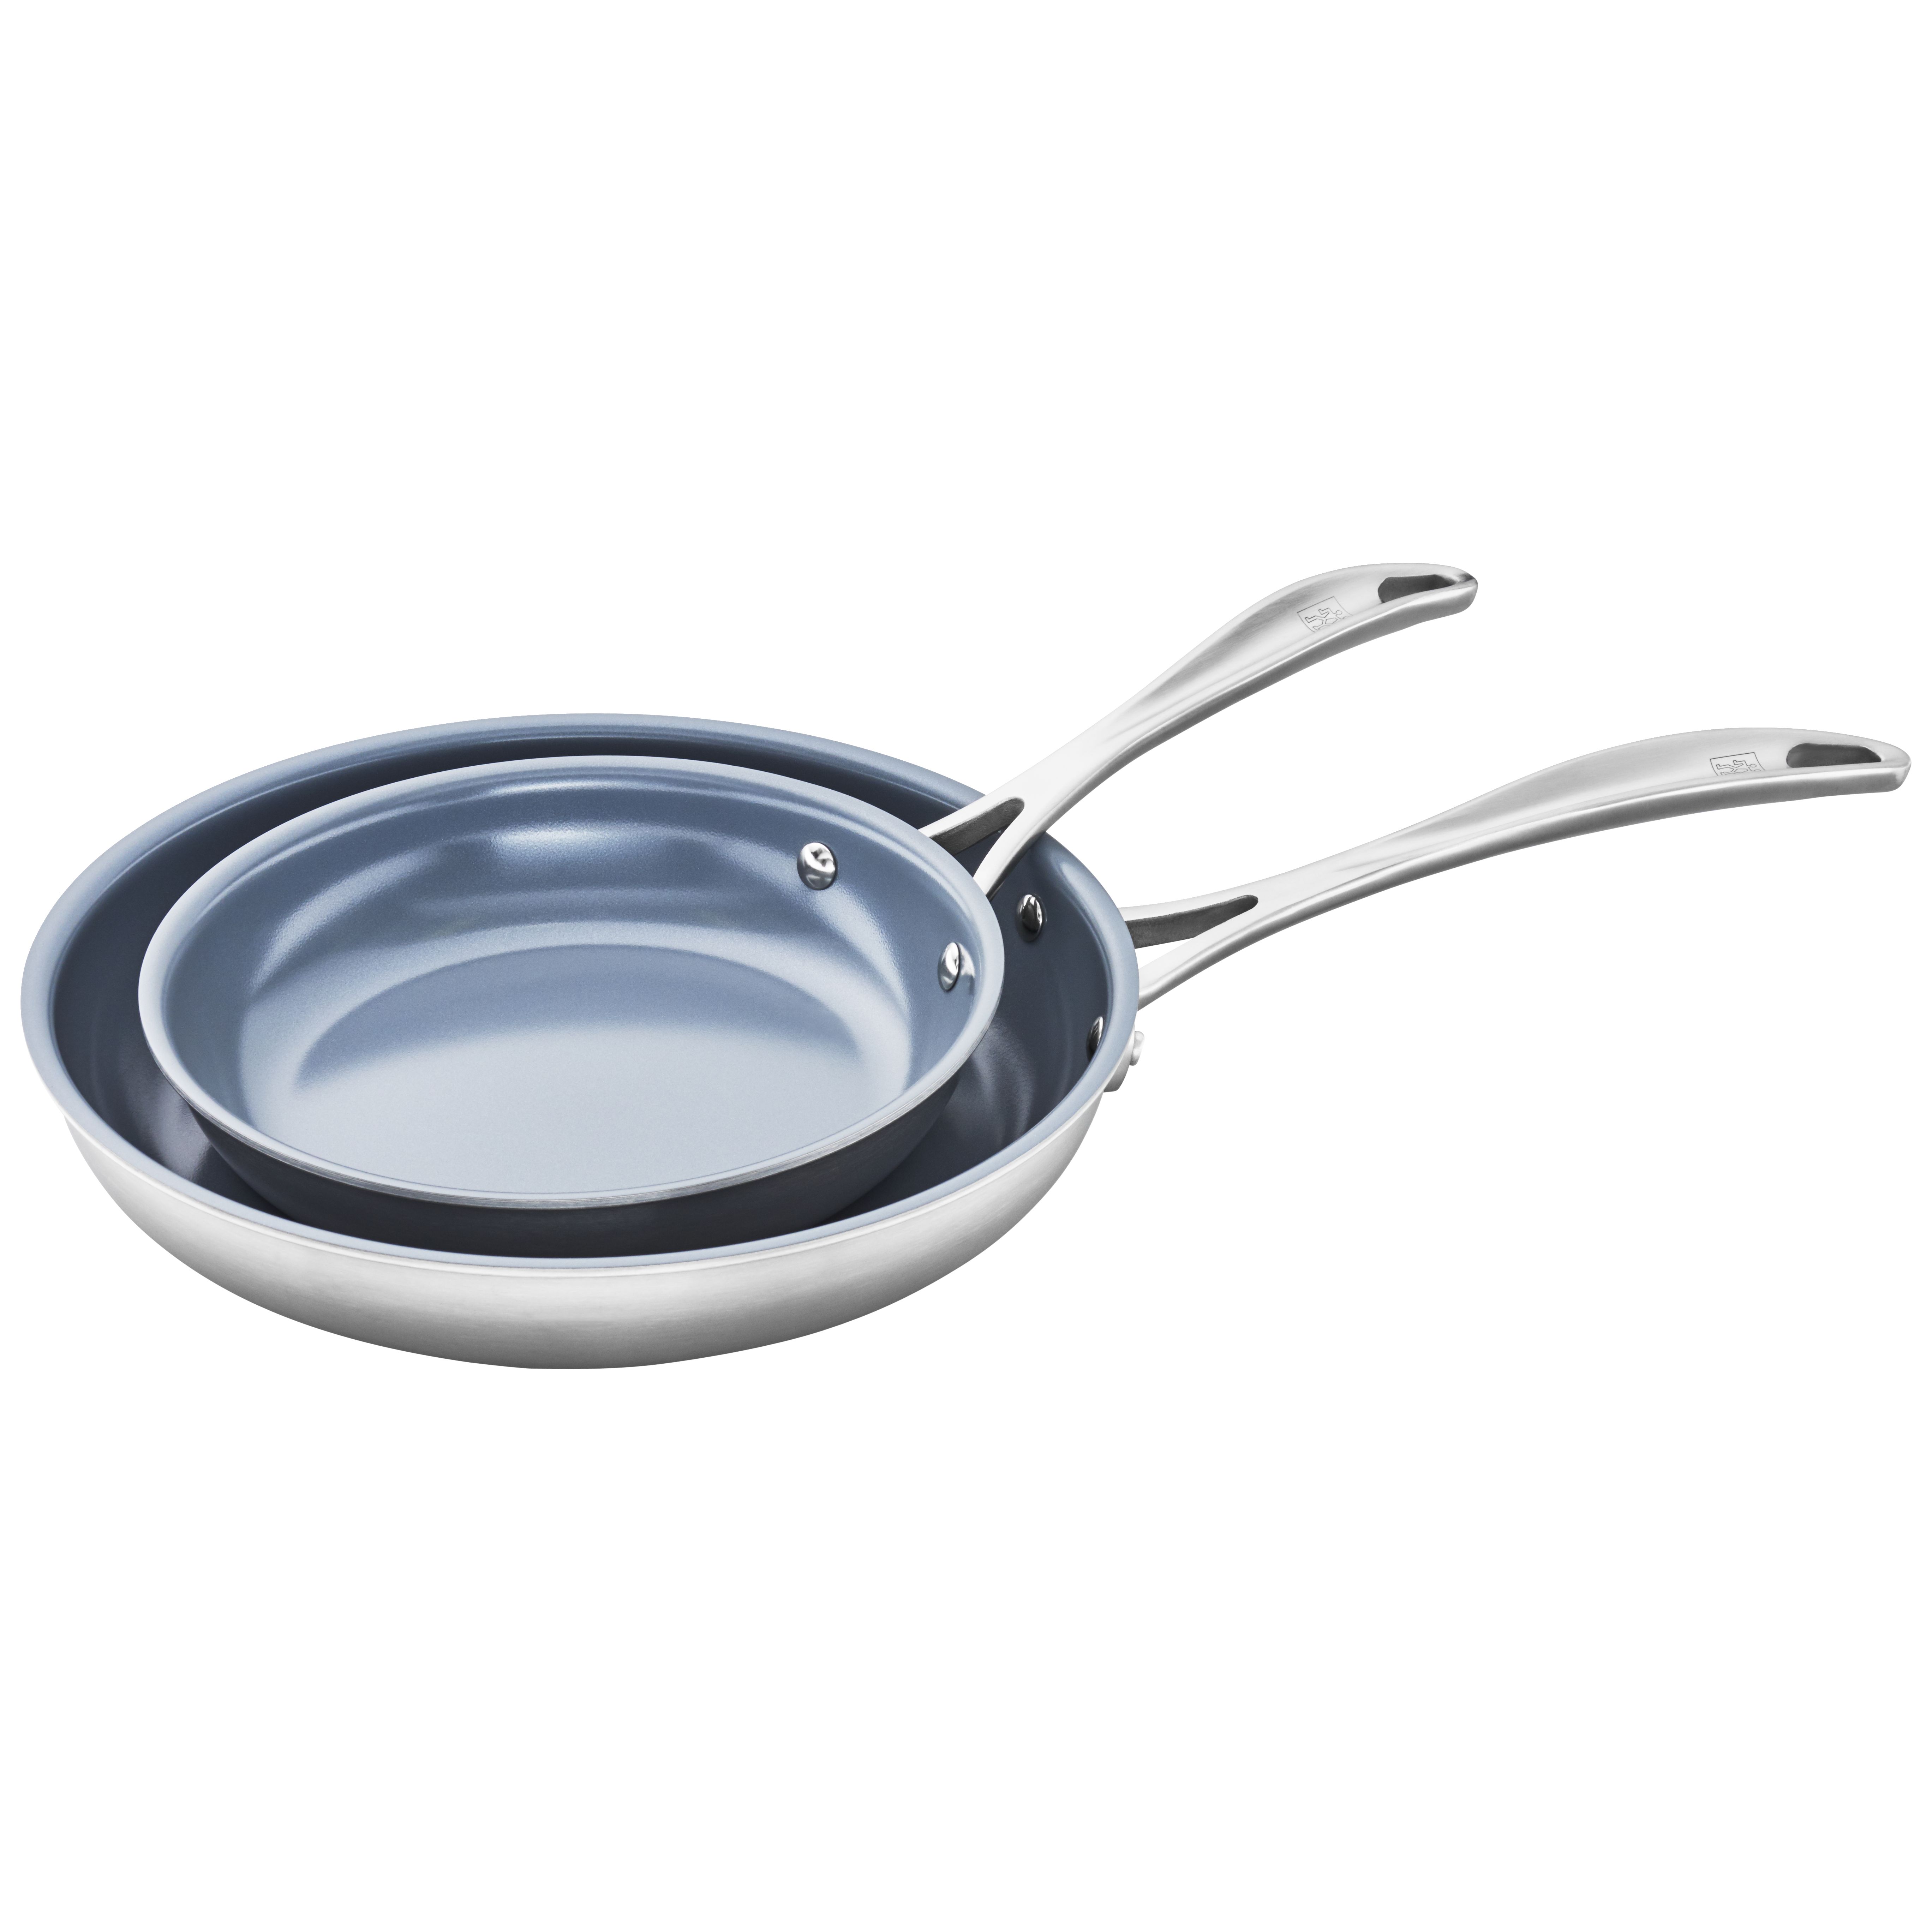 ZWILLING Spirit Stainless Sigma Clad, 10-inch, 18/10 Stainless Steel,  Ceramic, Frying pan